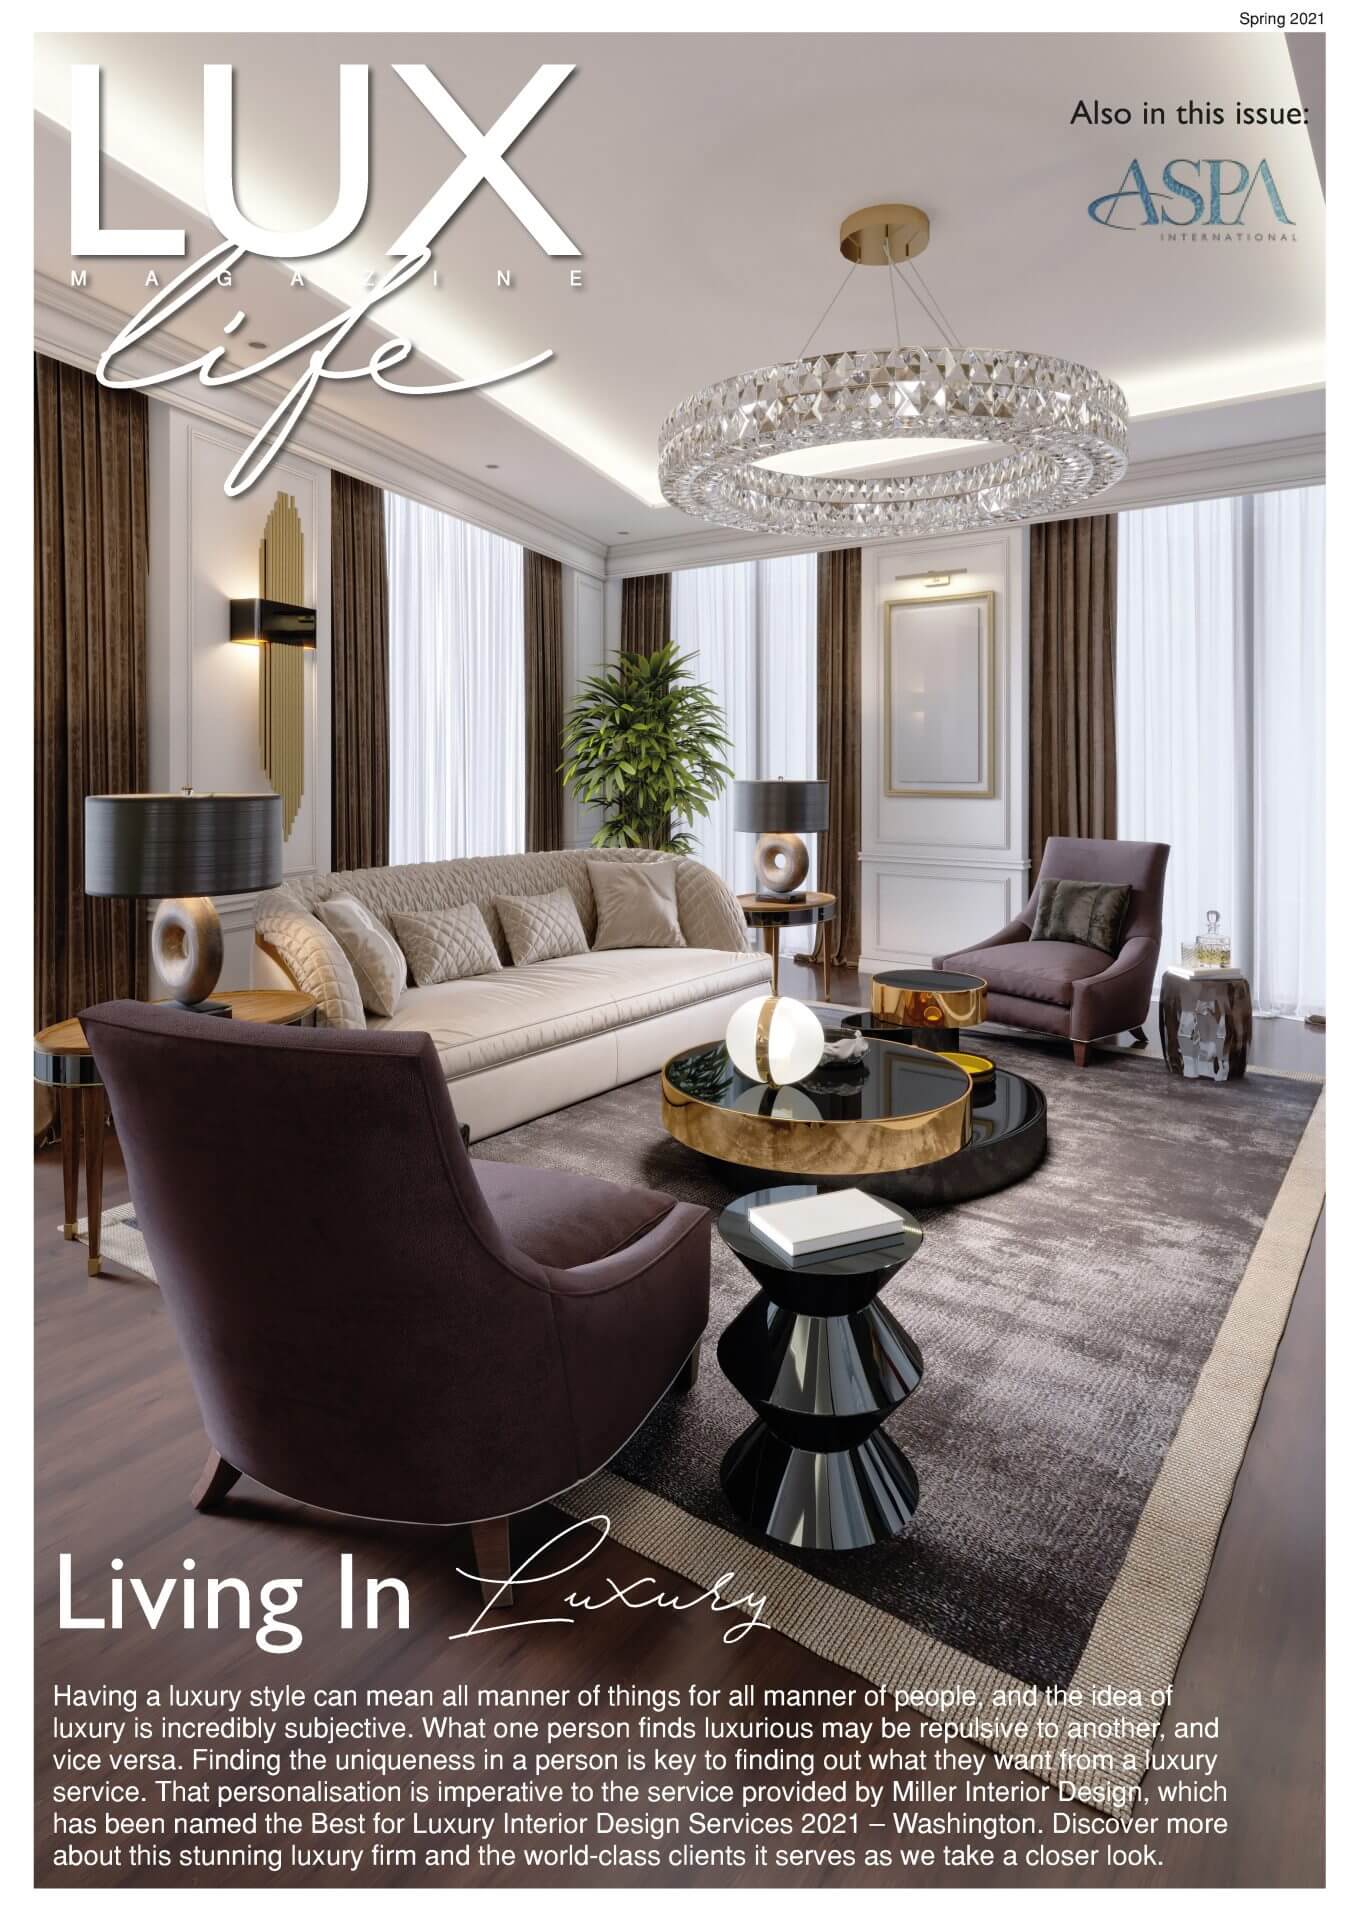 LUXlife Spring Issue 2021 Cover